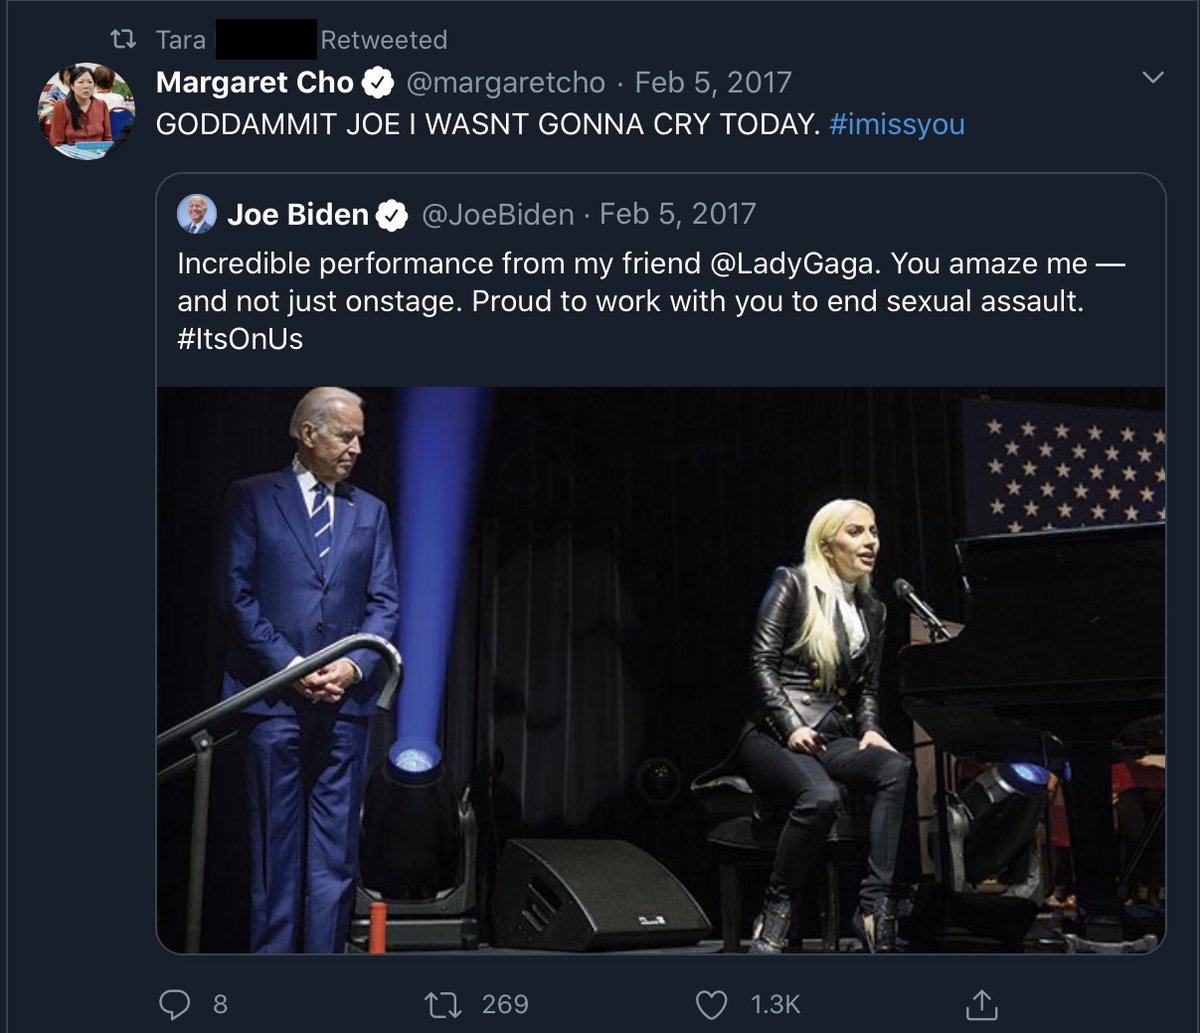 In 2017 she retweeted a tweet saying “GODDAMNIT JOE I WASNT GOING TO CRY TODAY” that was about Biden and Lady Gaga working to “end sexual assault”